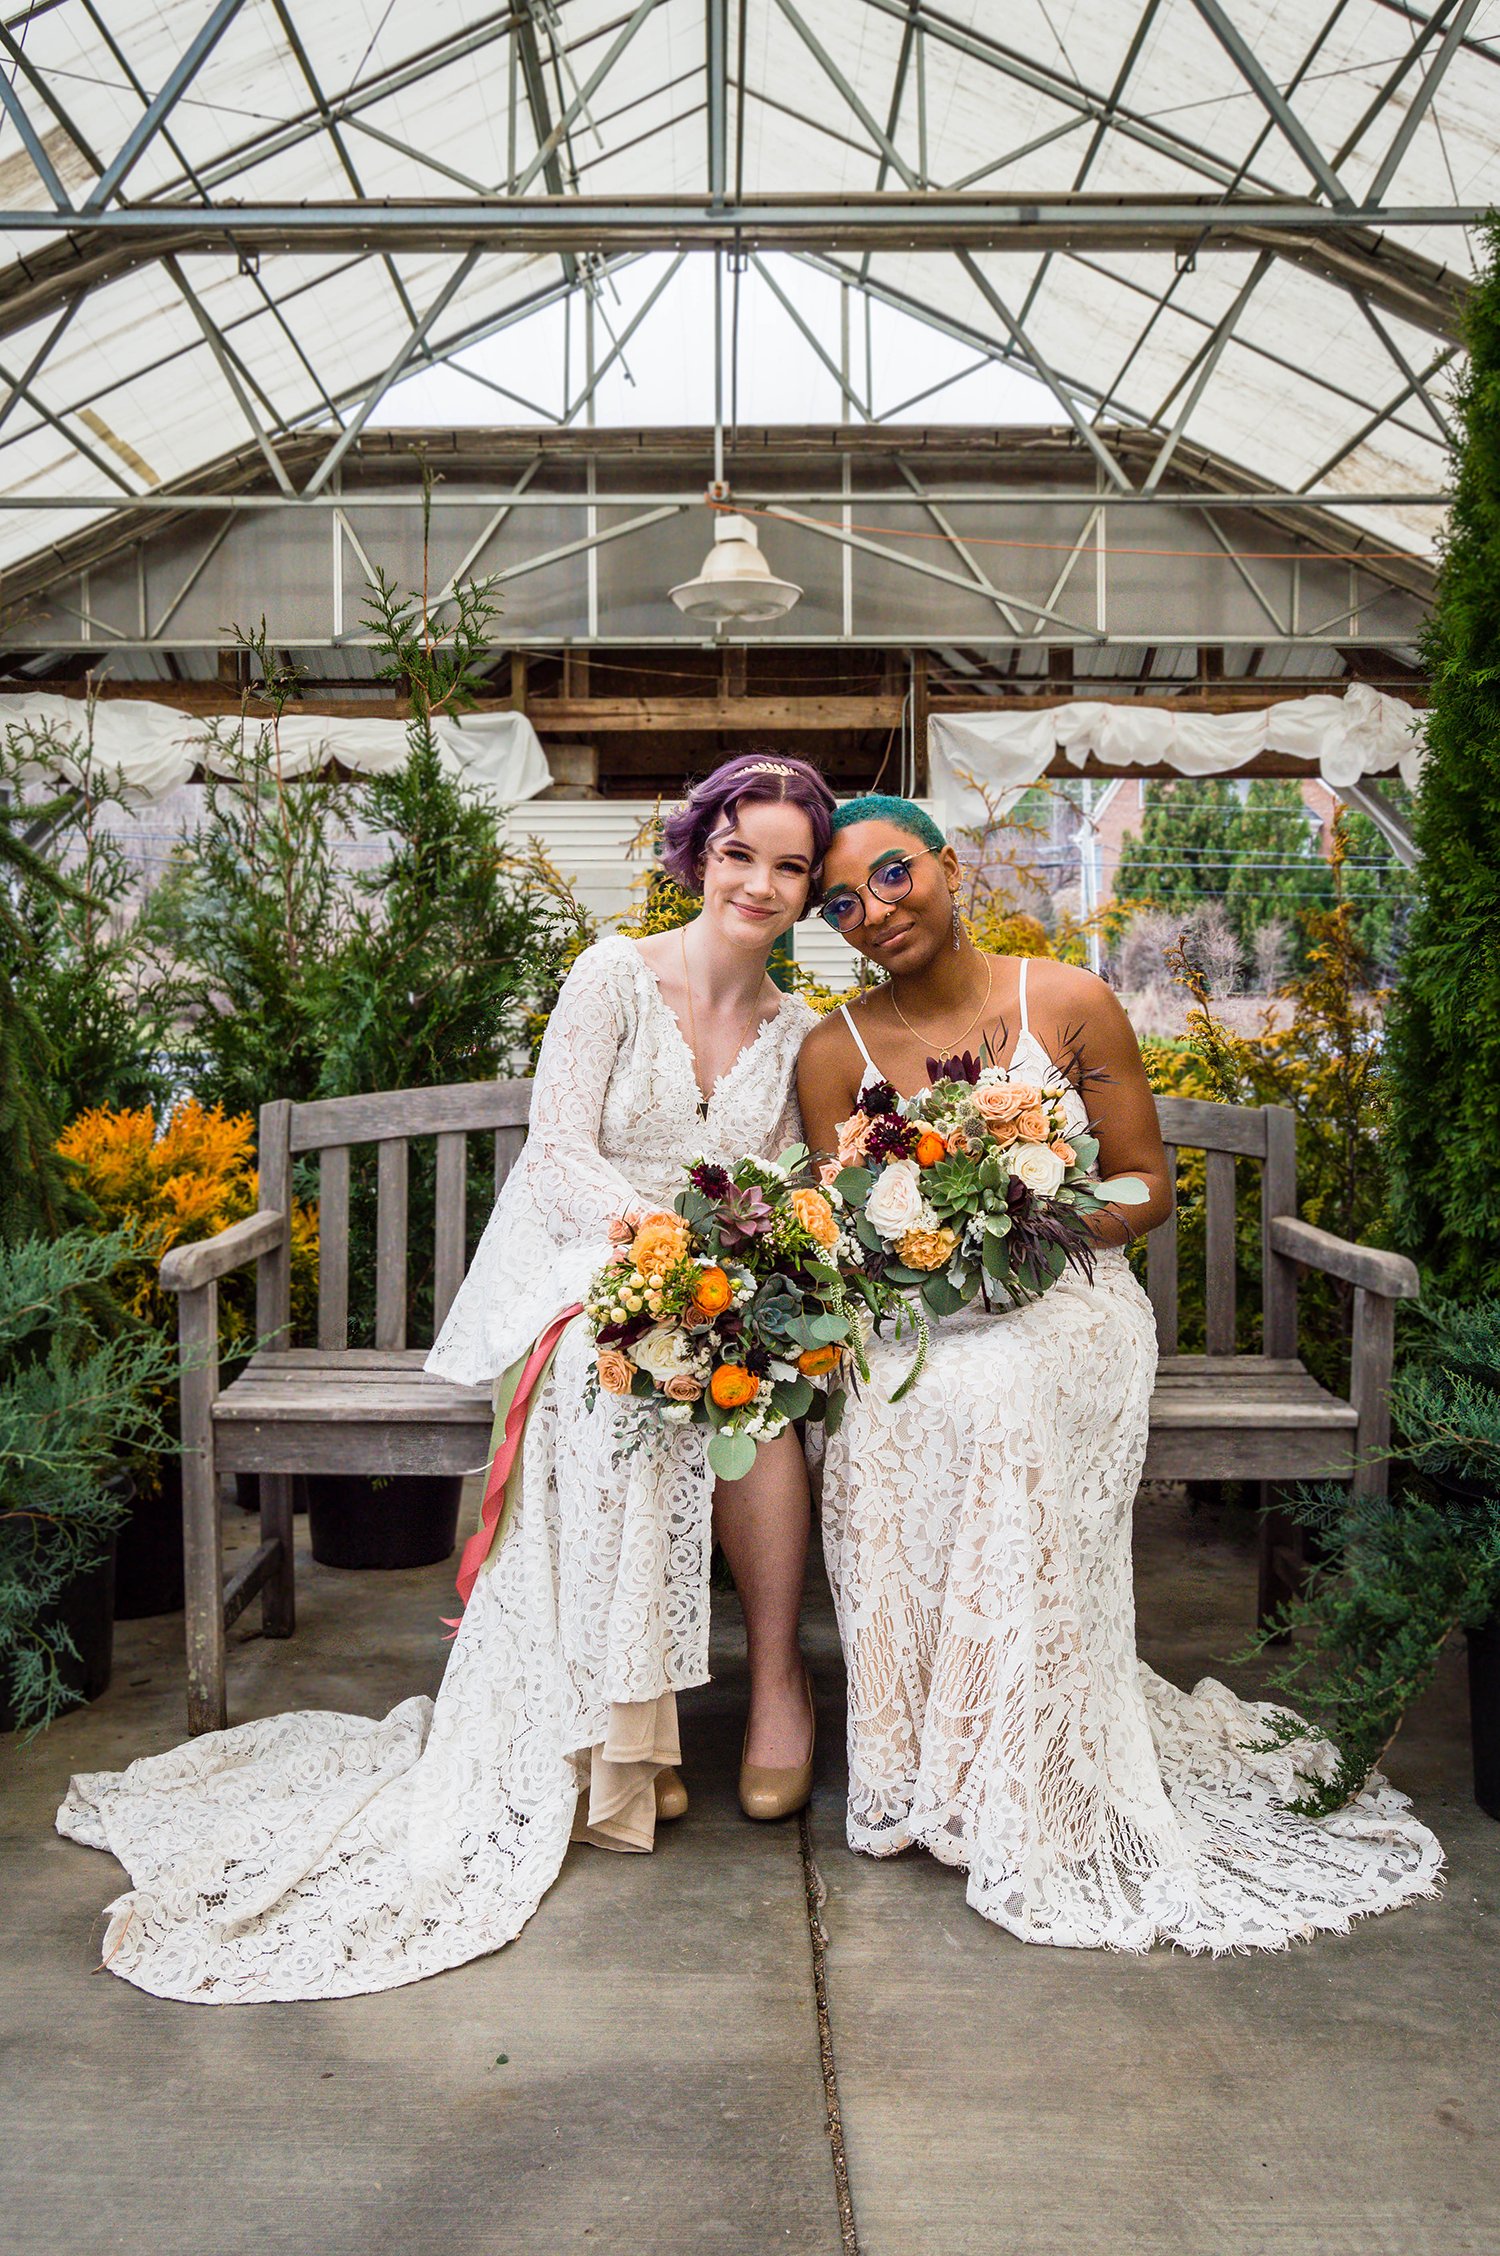 Models pose on a bench at a greenhouse elopement styled photoshoot in Virginia.